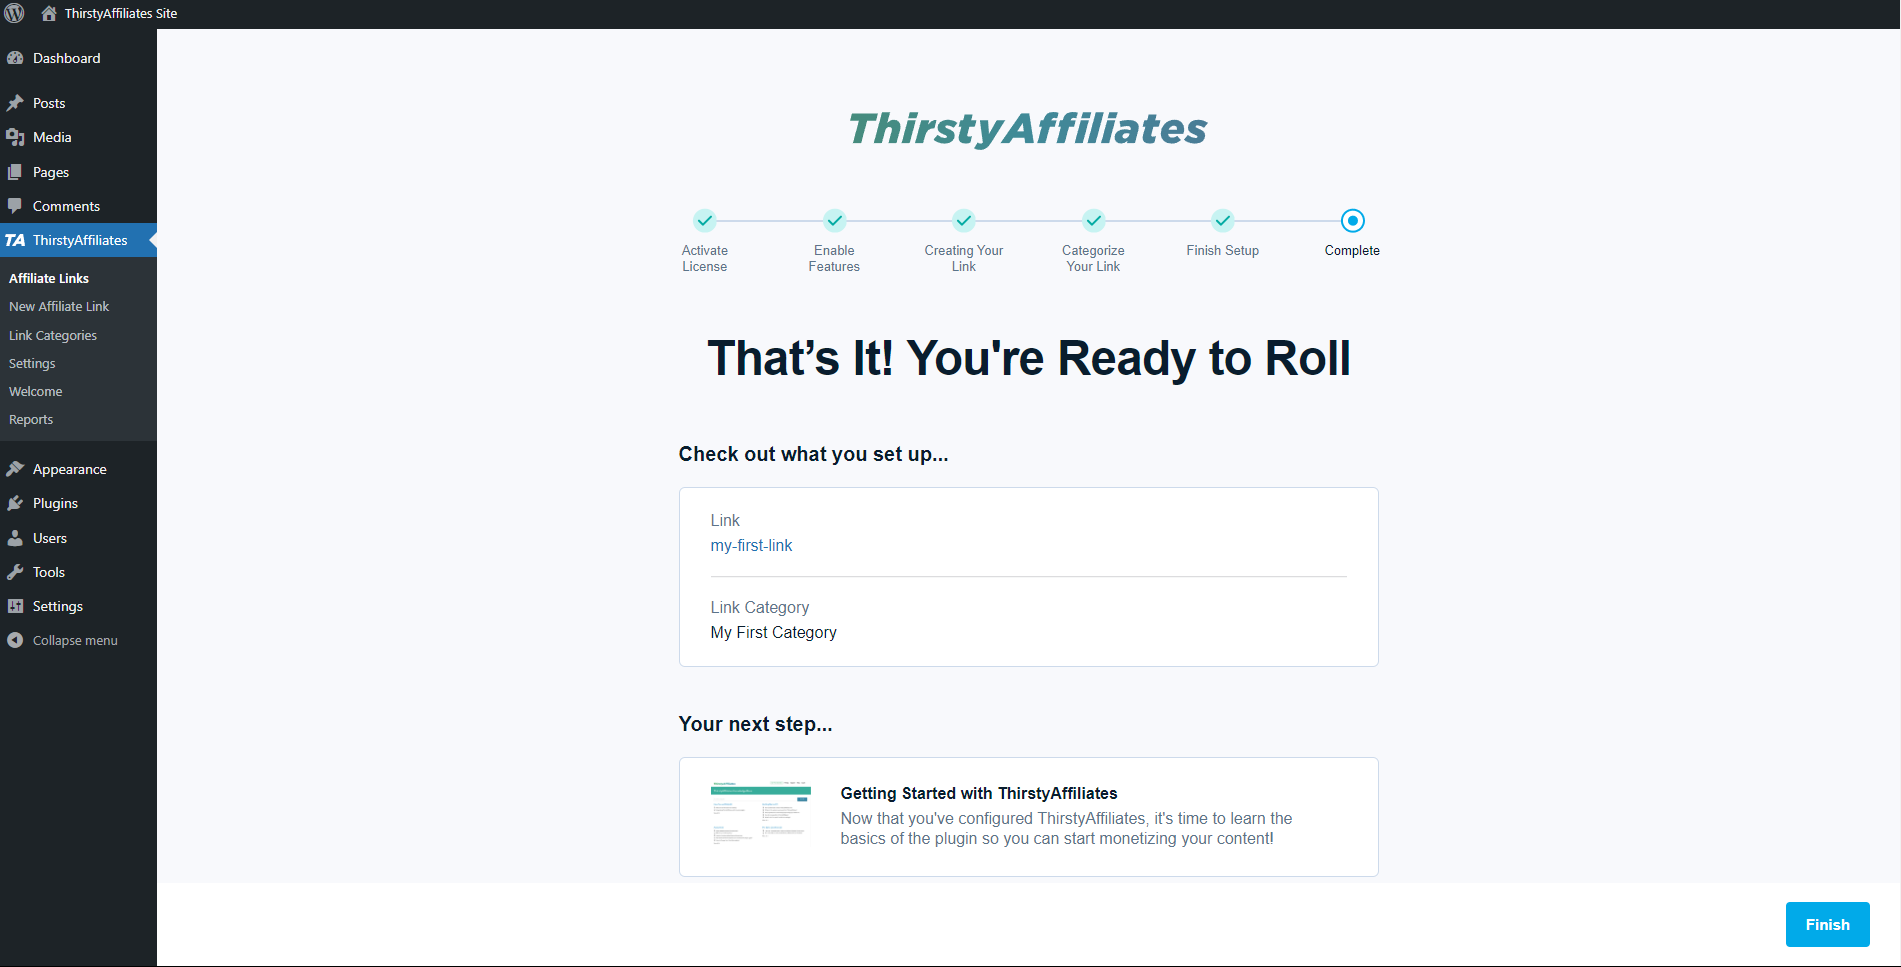 ThirstyAffiliates - Setup Completed